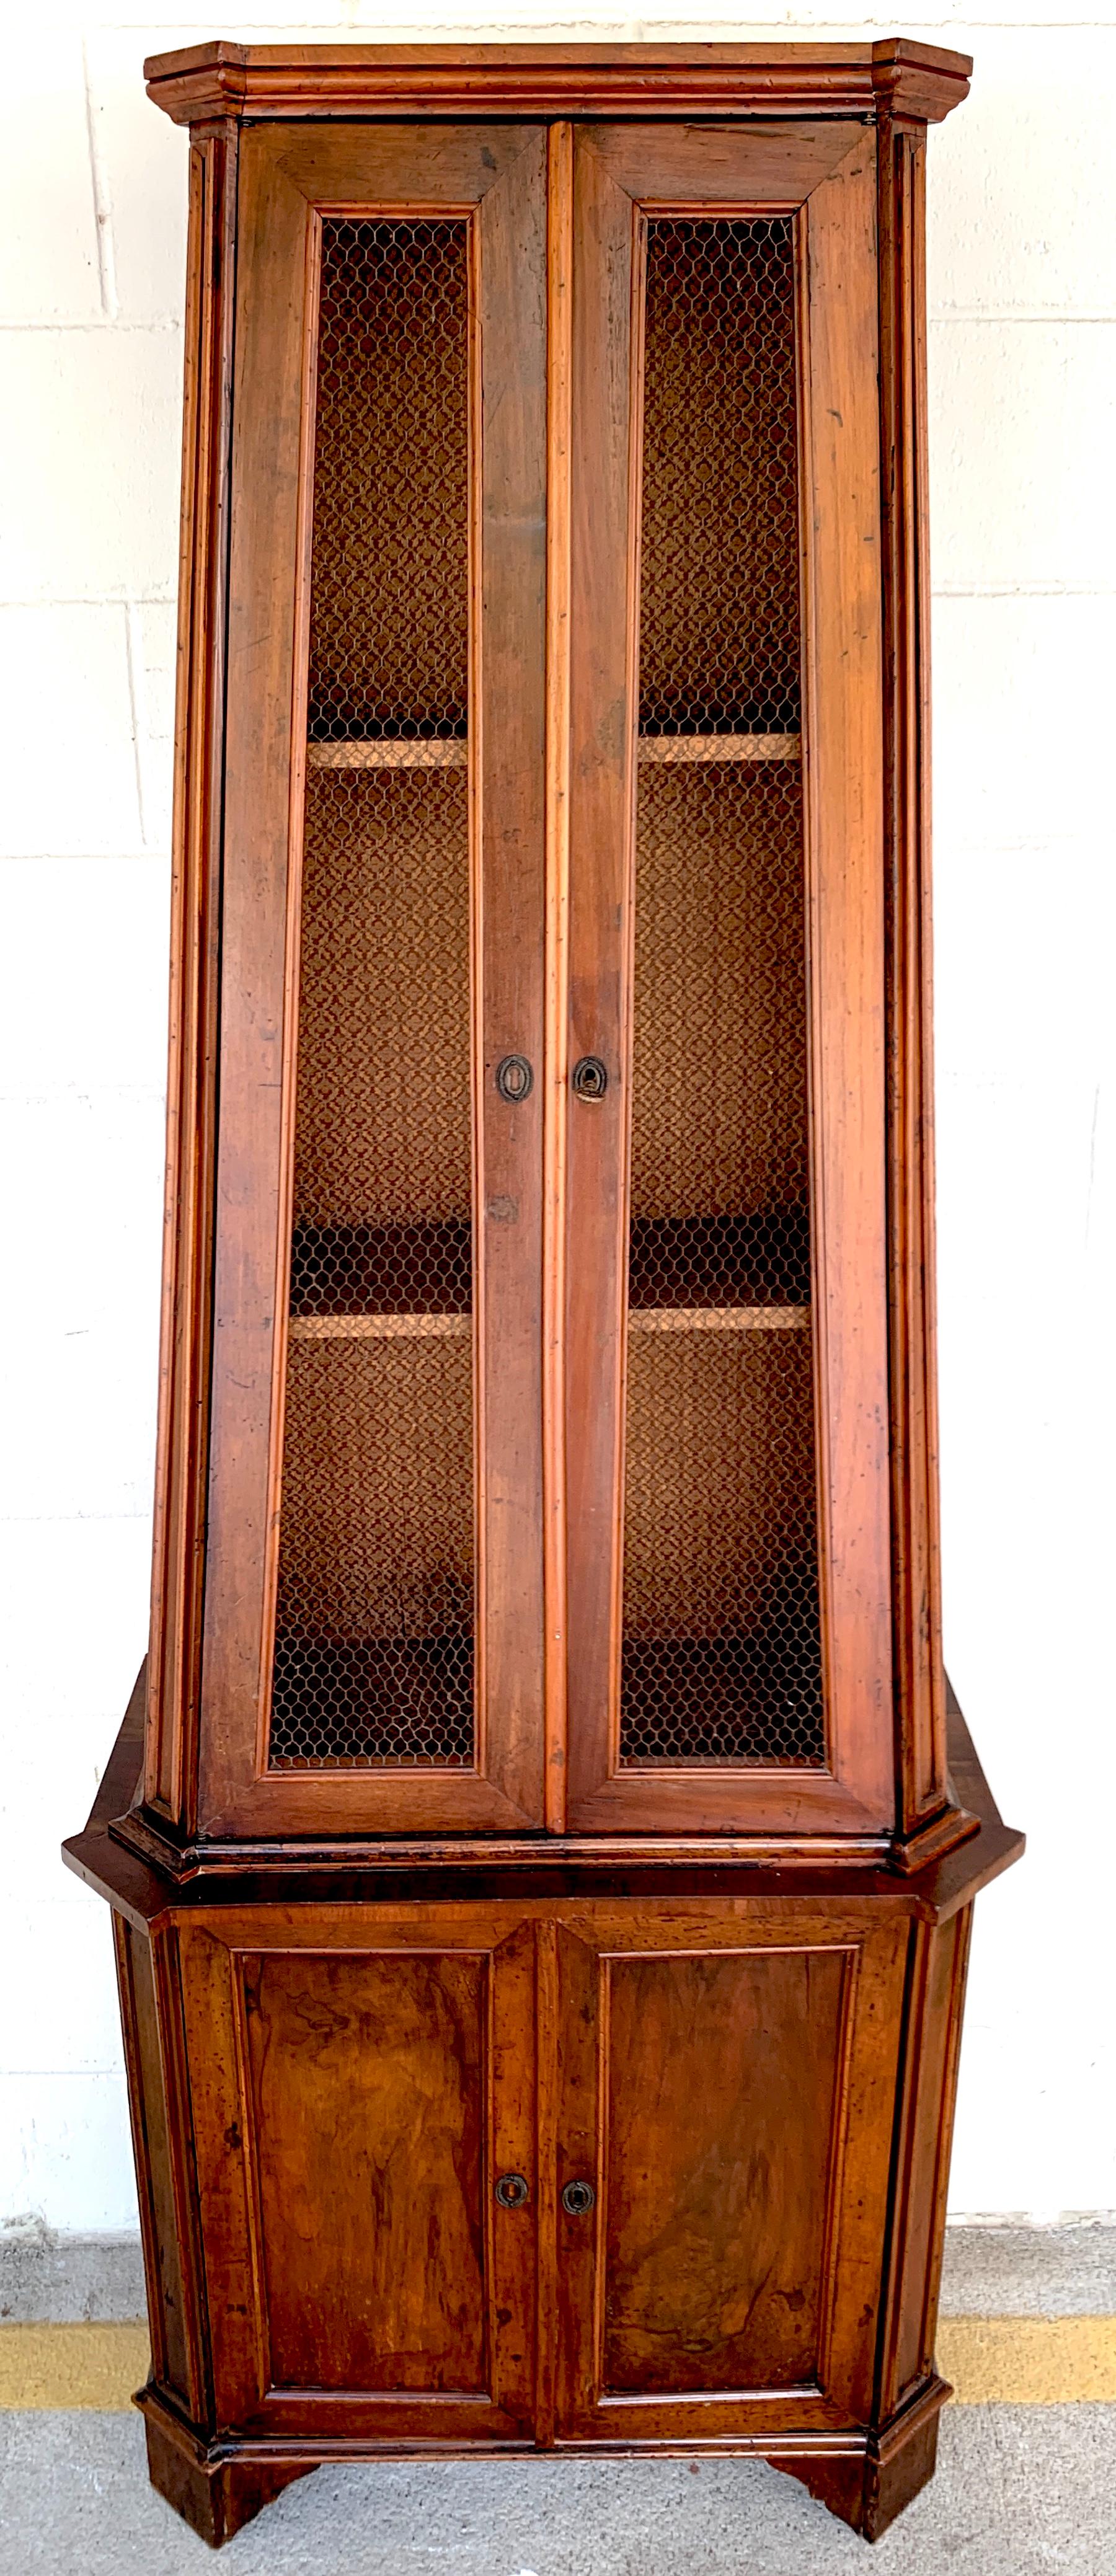 Antique Italian neoclassical olivewood pyramidal cabinet, in two parts, the tapering upper case with shelved interior, and brass mesh doors, with key. The lower paneled case fitted with two blind doors. 
Upper cabinet measures: 50